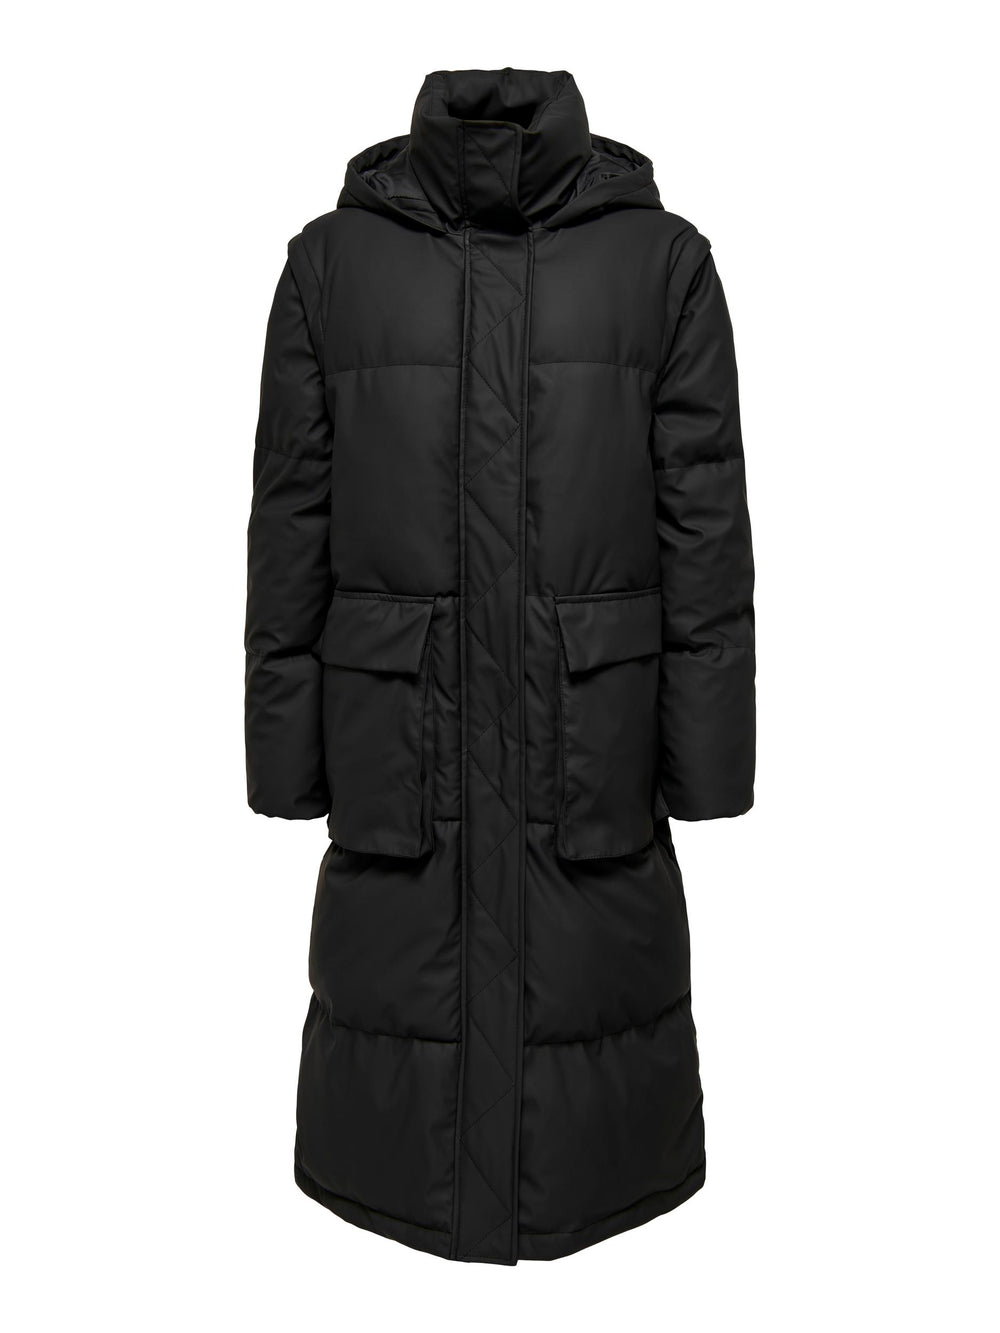 Diskurs destillation Hold sammen med ONLY Sally 2 in 1 Water Repellent Quilted Long Hooded Puffer Coat & Gilet  in Black | One Nation Clothing ONLY Sally 2 in 1 Water Repellent Quilted  Long Hooded Puffer Coat